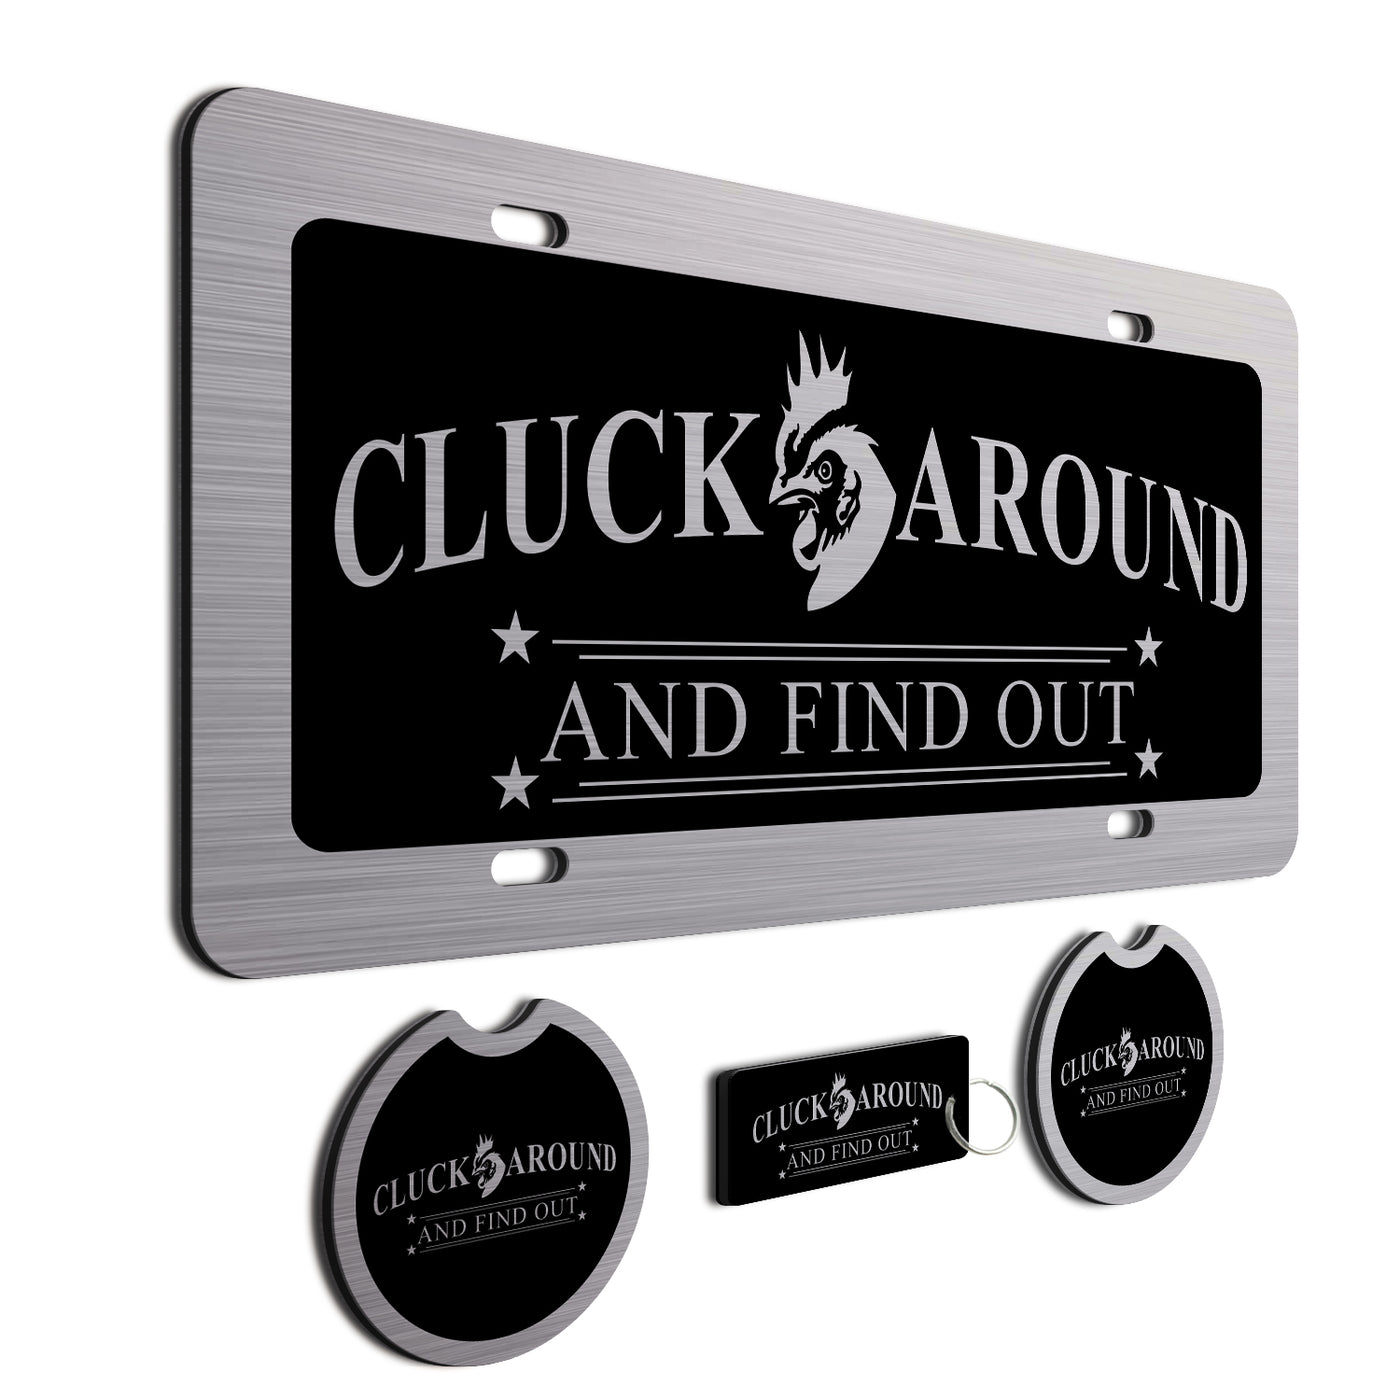 Cluck Around and Find Out Car Tag - Chicken Farmer License Plate Set - Perfect Farmer Gift for Farm Use and Truckers - Made in the USA - Includes 2 Coasters and Keychain